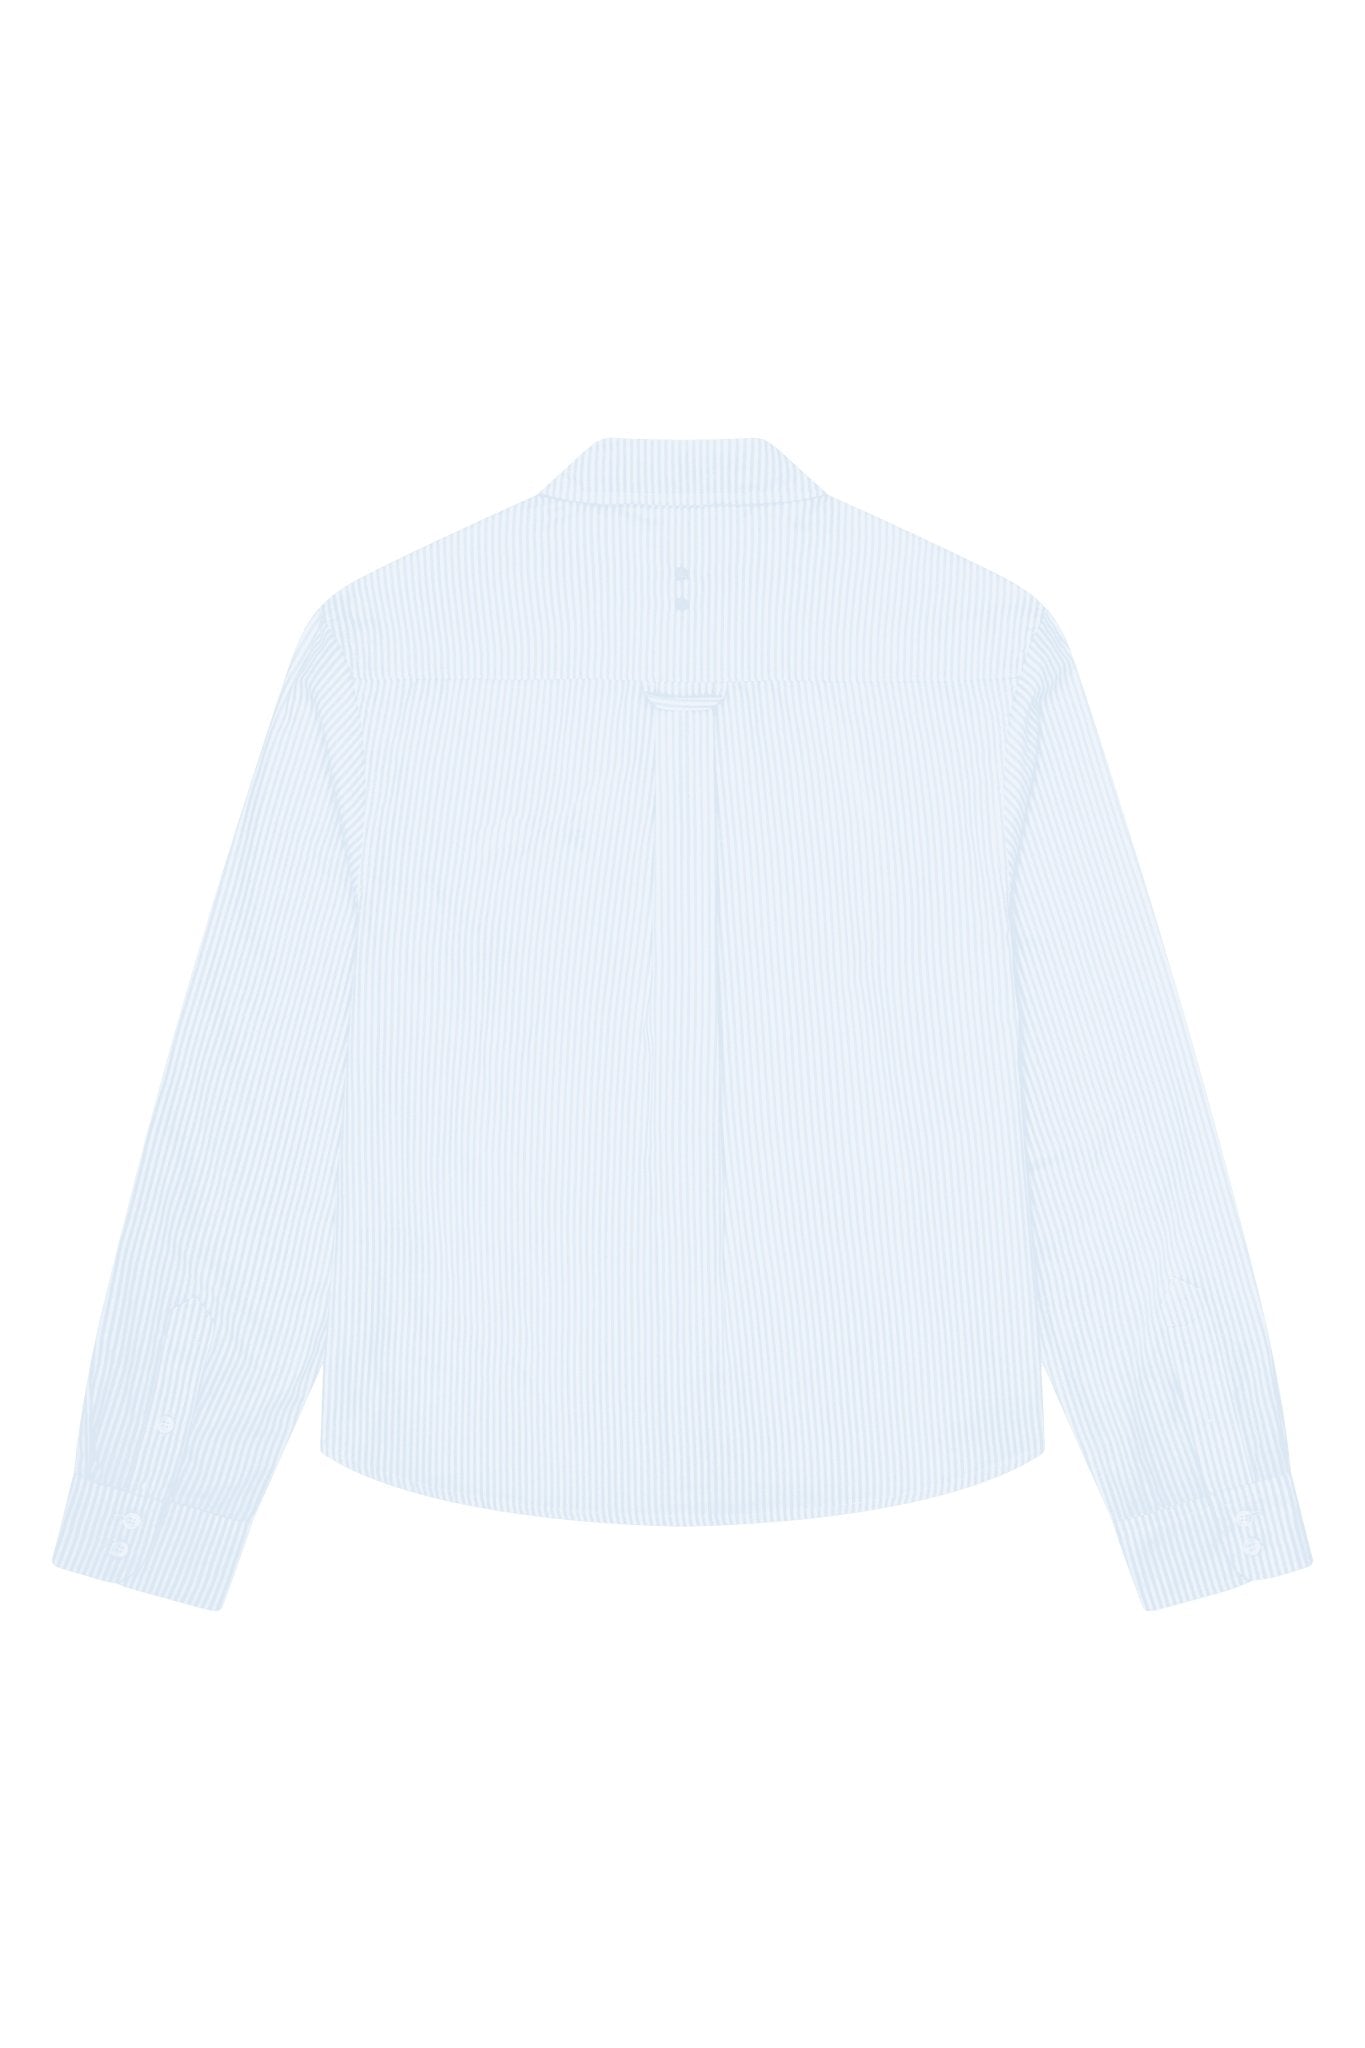 about---blank.comstriped oxford shirt blue/white